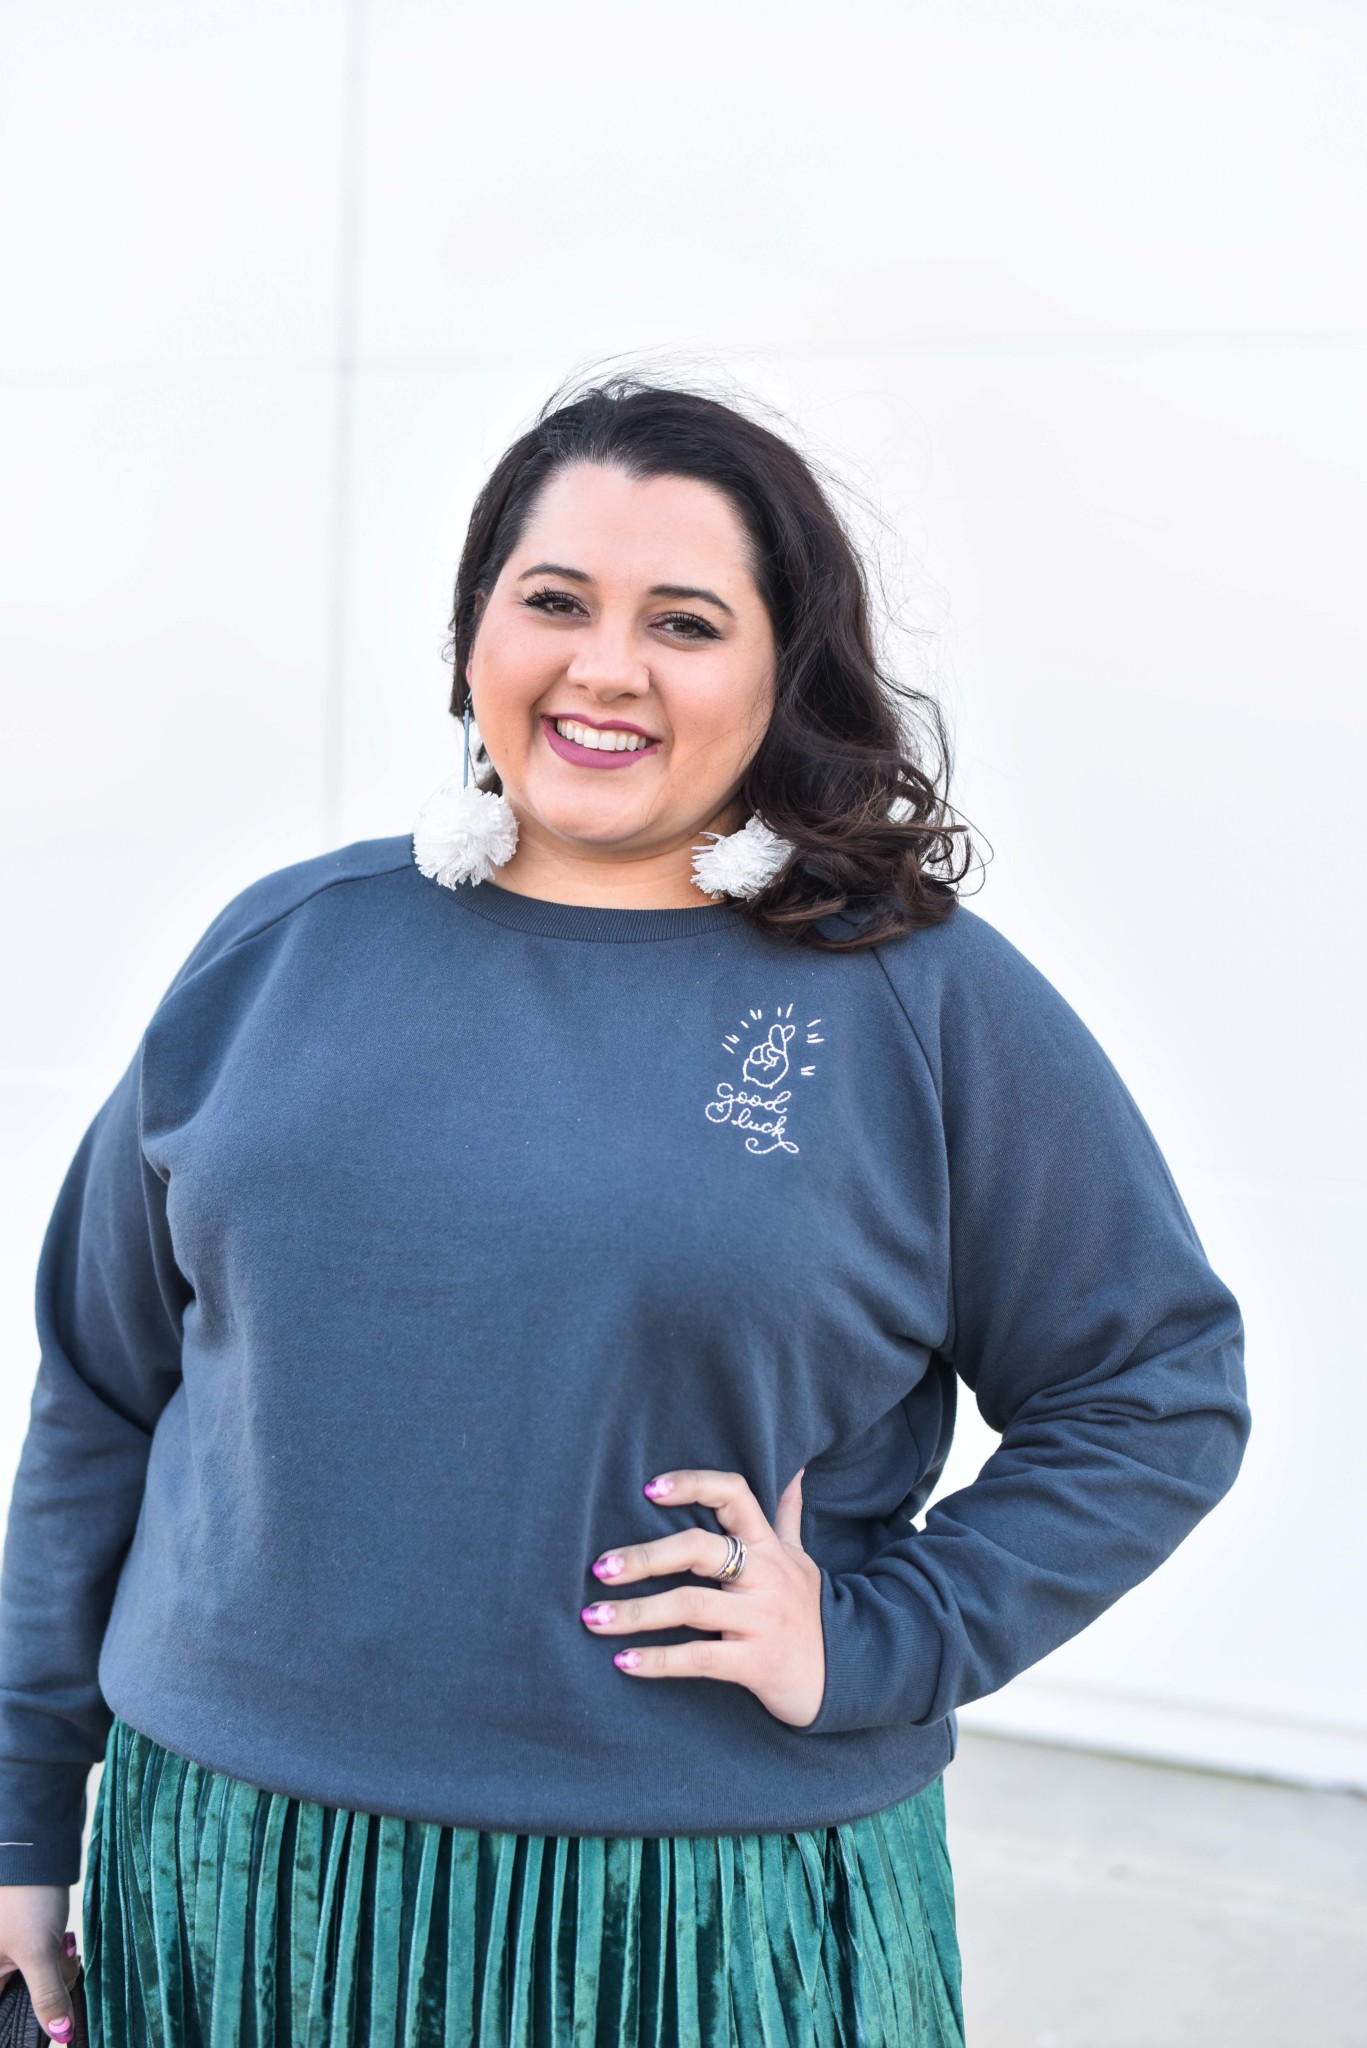 Loving the new plus size embroidered sweatshirt from Ori. #plussizestyle